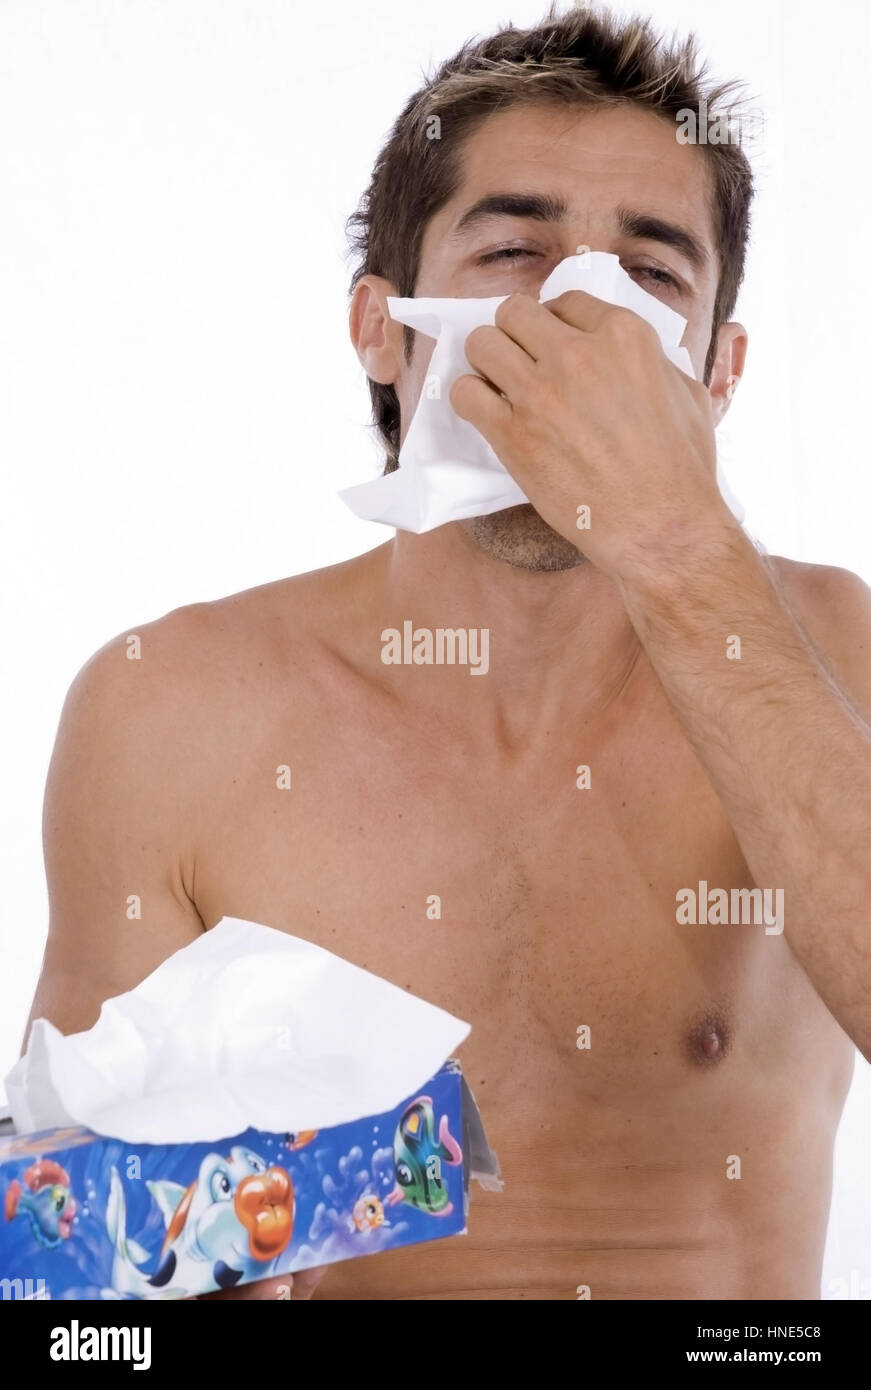 Model release, Mann schneuzt sich - man is blowing his nose Stock Photo